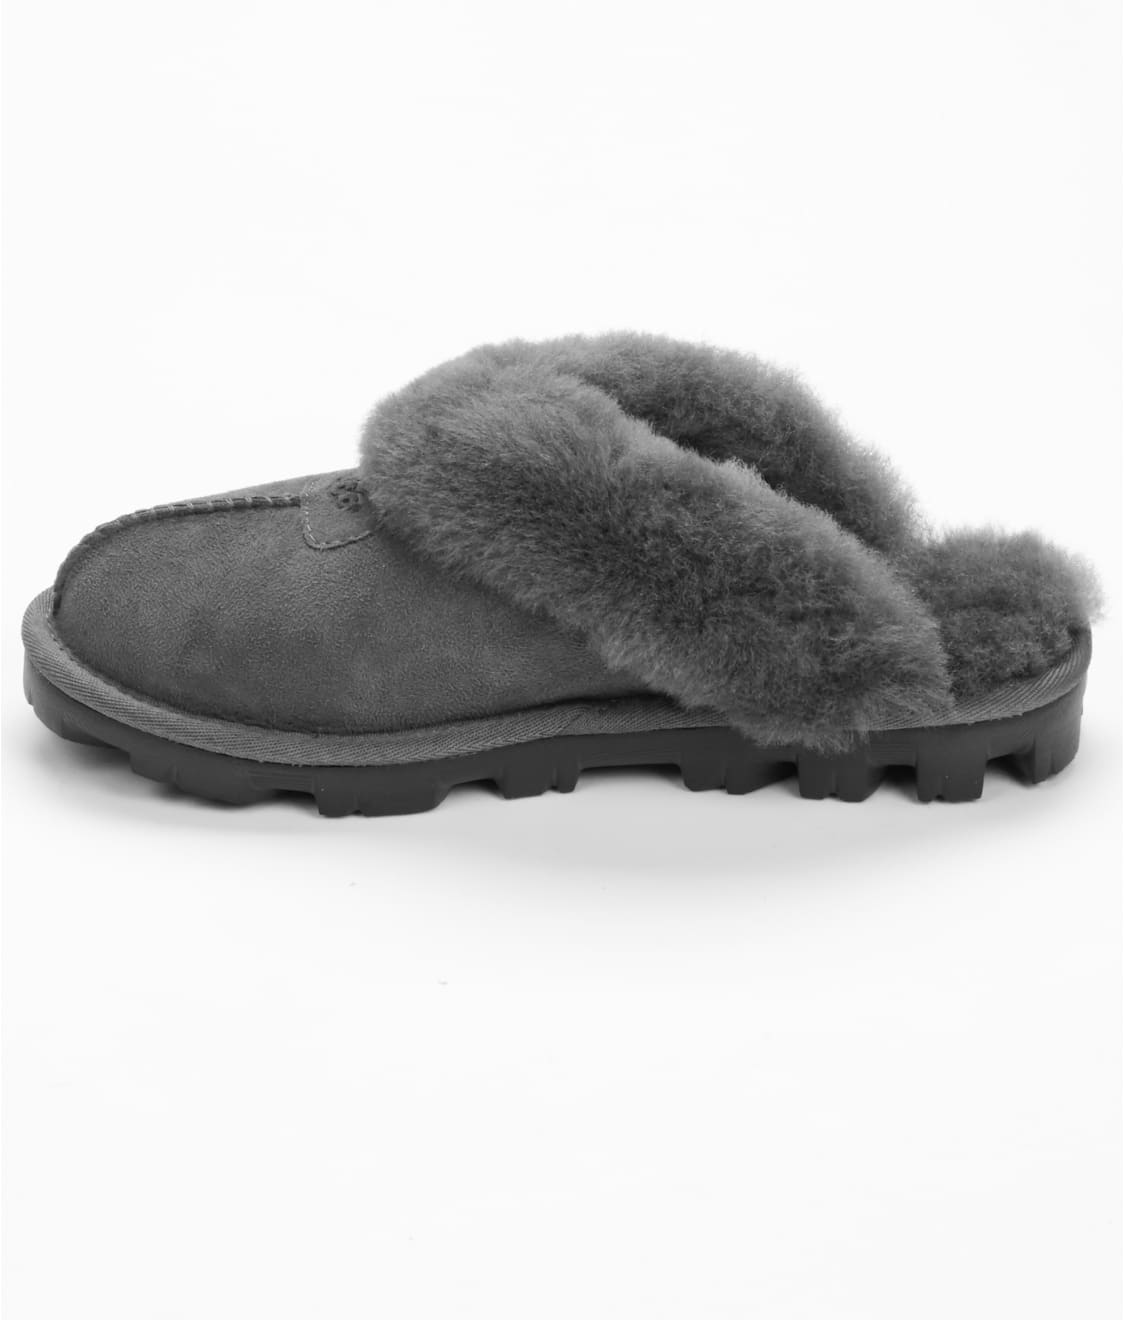 UGG Coquette Slippers & Reviews | Bare Necessities (Style 5125)